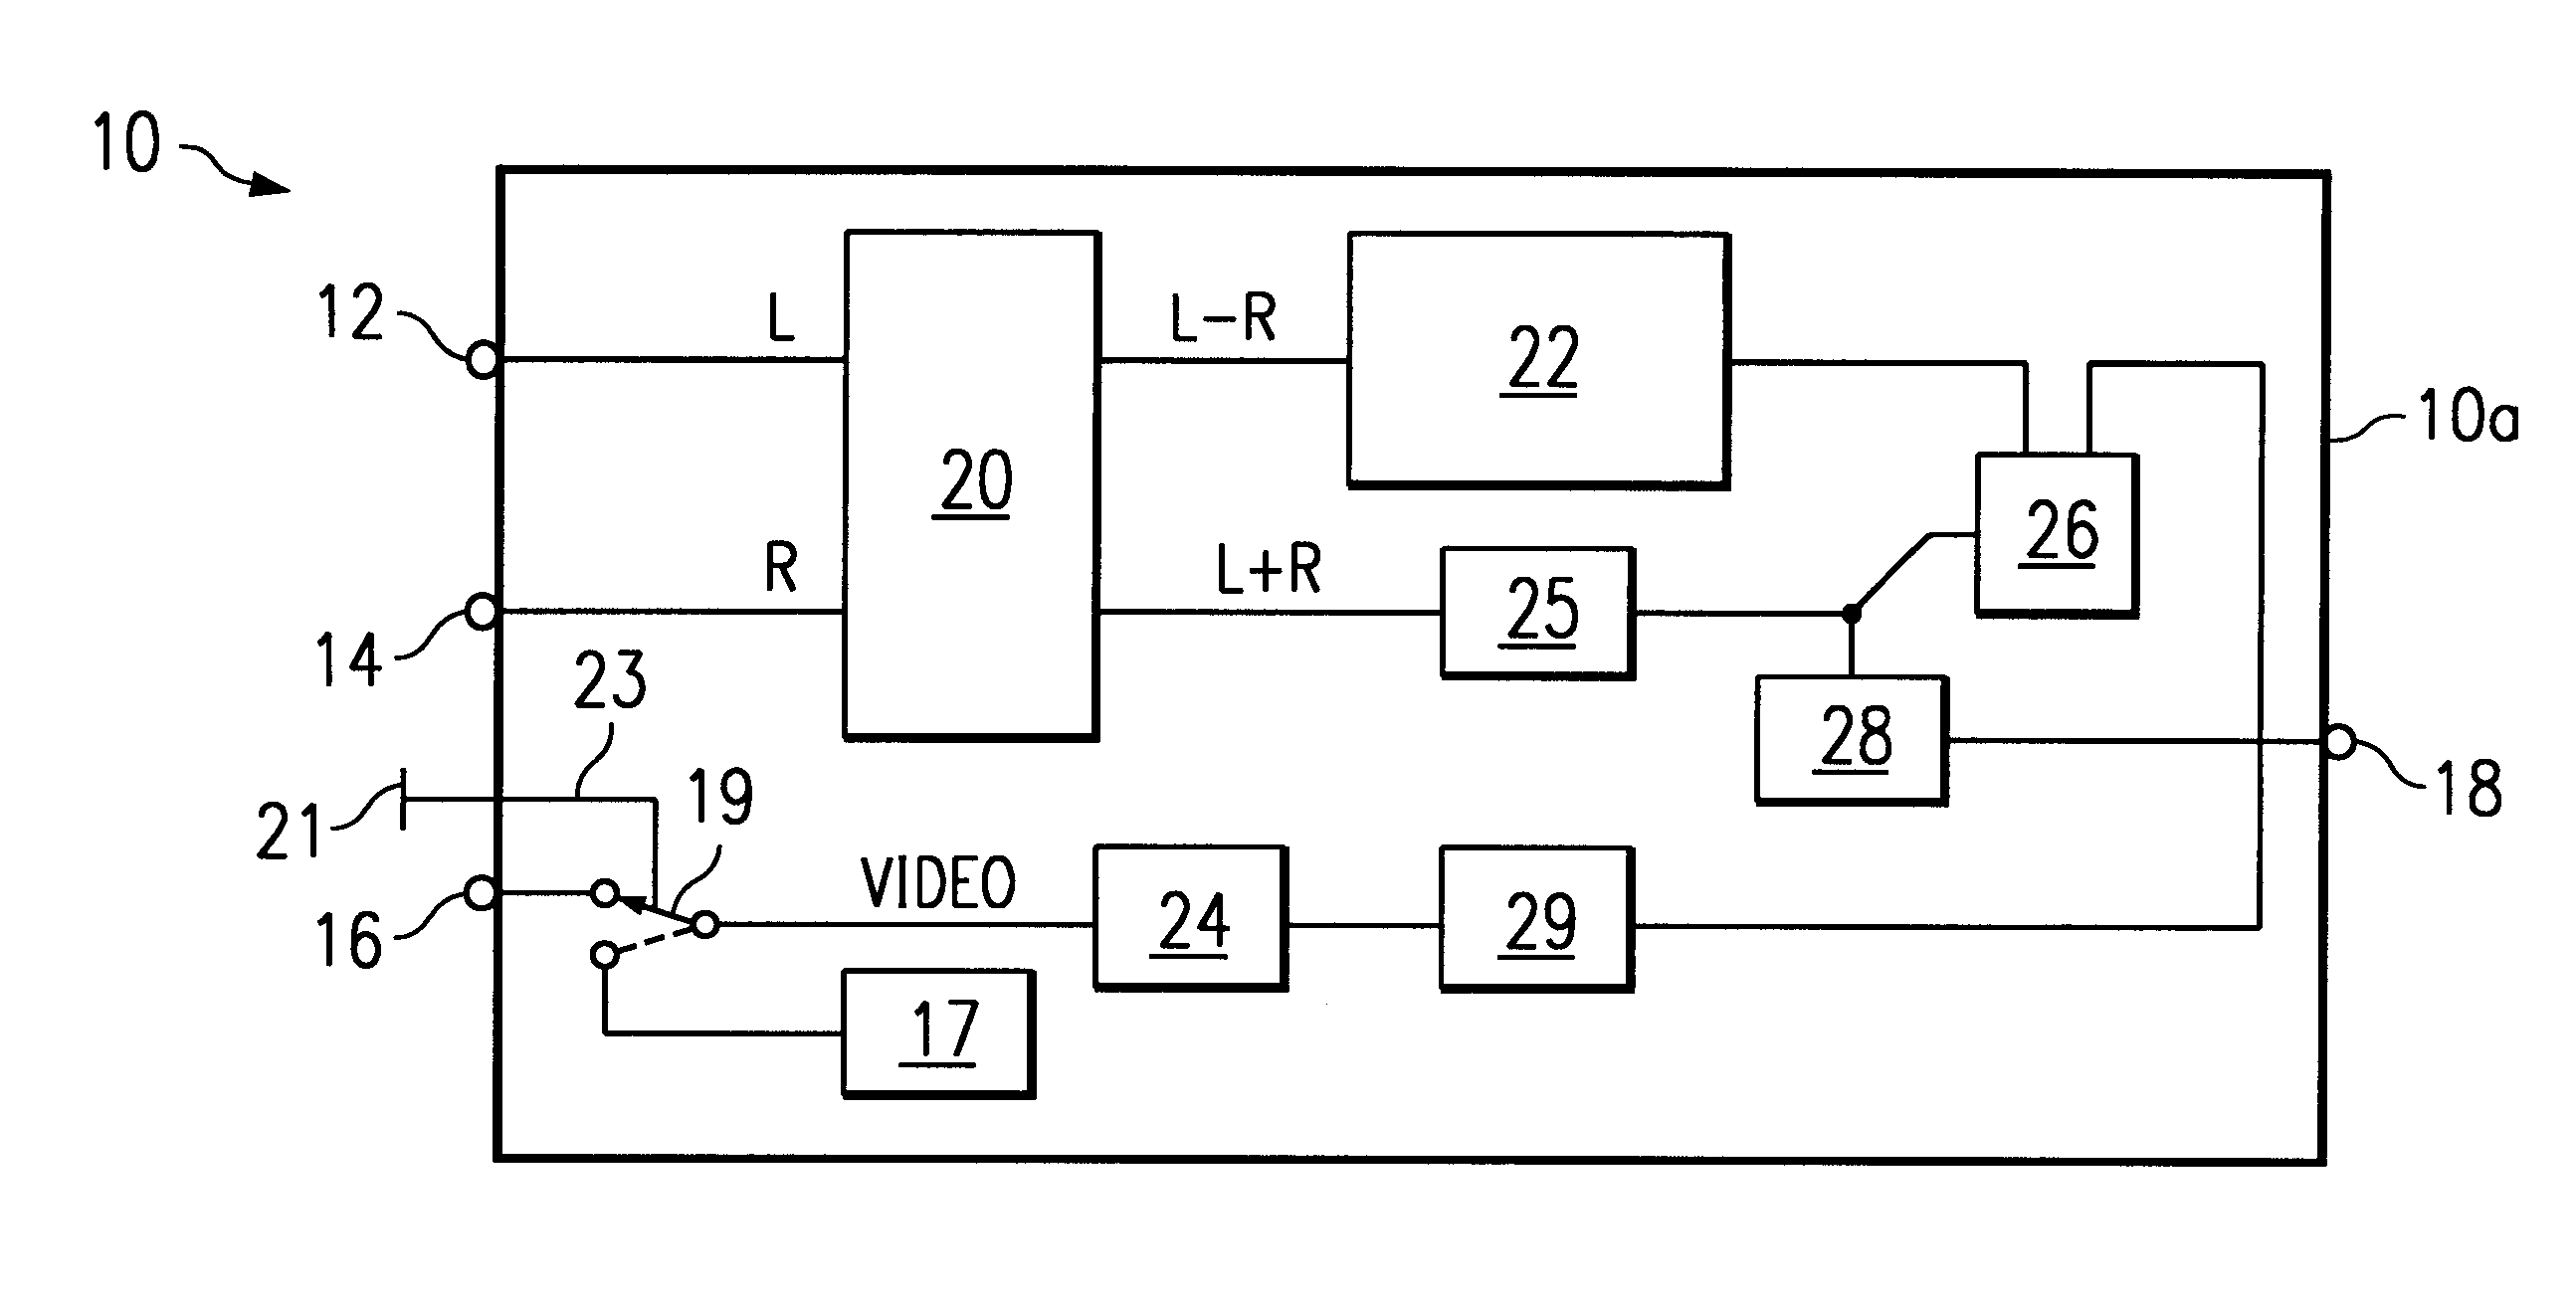 Multichannel television sound stereo and surround sound encoder suitable for use with video signals encoded in plural formats